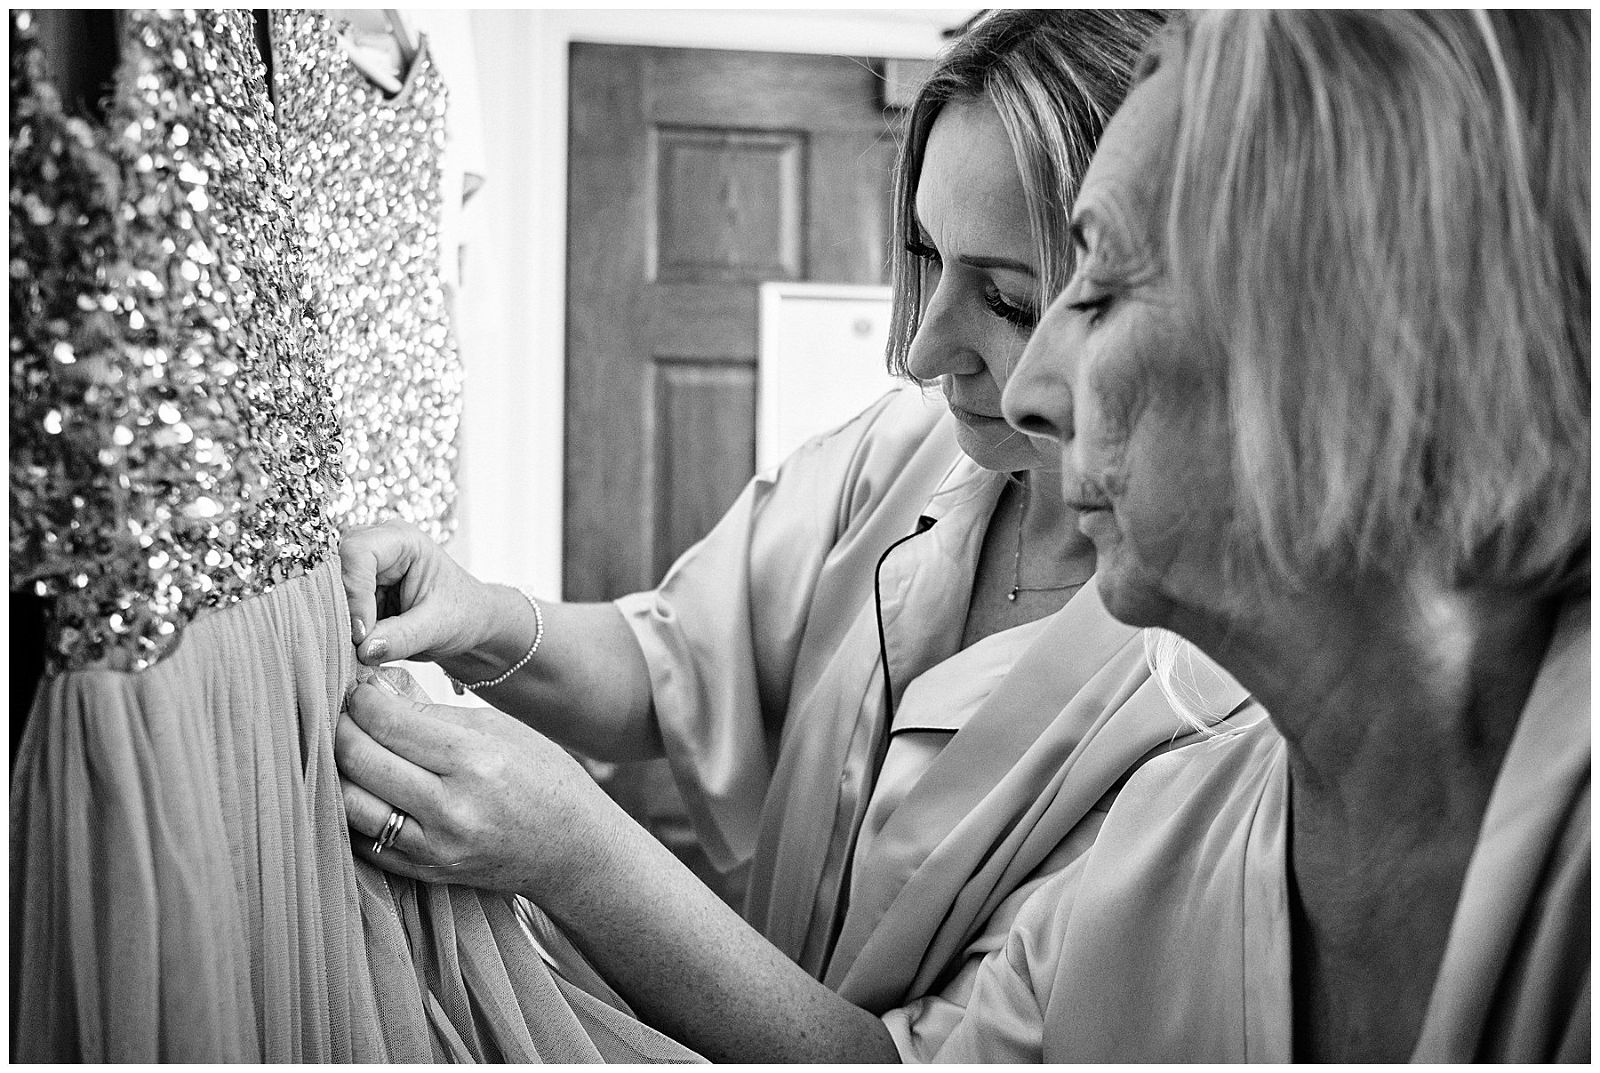 Capturing the wedding morning preparations for the bridal party at Hawkstone Hall in Shrewsbury by Documentary Wedding Photographer Stuart James